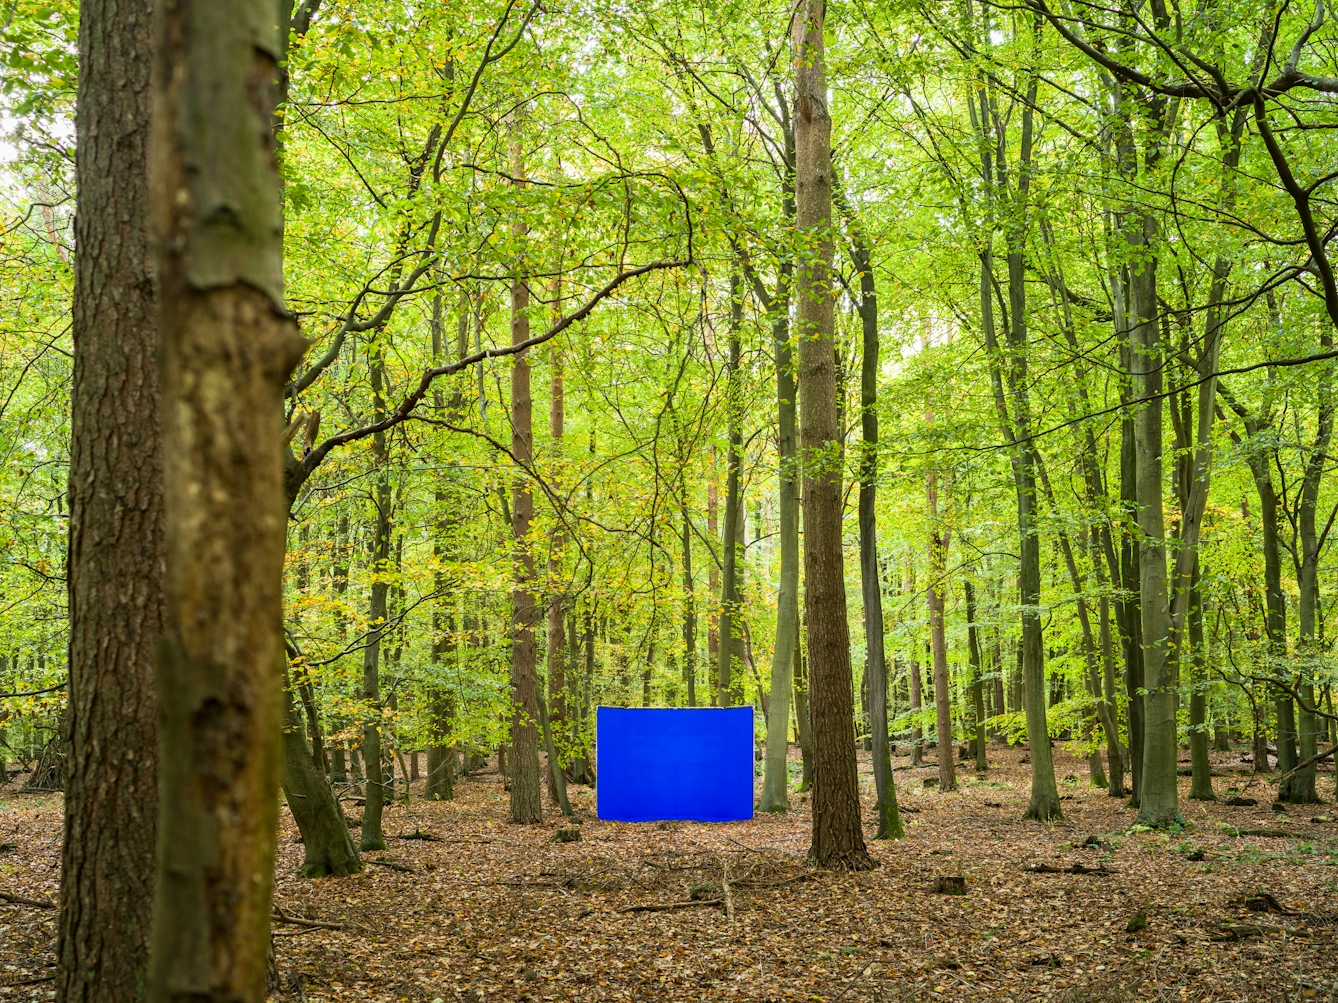 Colour landscape photograph showing an ancient woodland scene. In the lower centre of the image, in a clearing, is a large rectangular photographic background frame. Stretched across the frame is a vibrant blue chroma key fabric. The floor of the wood is covered in rust coloured leaves and fallen branches. To the left and right of the image tall strong tree trunks rise up through the frame to a canopy of green leaves. As the scene recedes into the distance the tree trunks continue to rise up around the screen. The green leaves of the trees obscure all the sky from view, save for a few bright glimpses here and there.